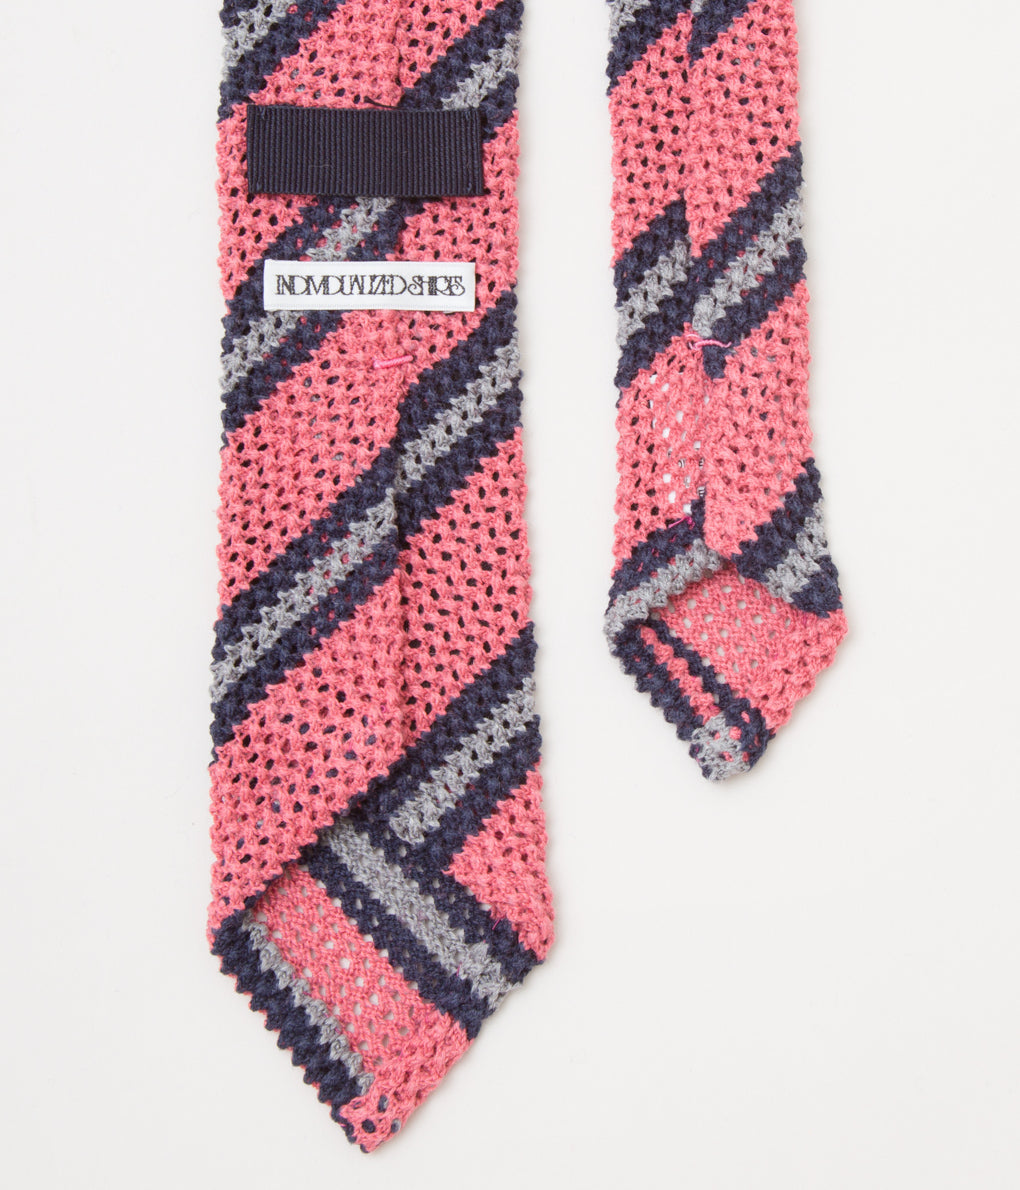 INDIVIDUALIZED ACCESSORIES"KNIT REGIMENTAL TIE"(PINK/SILVER)